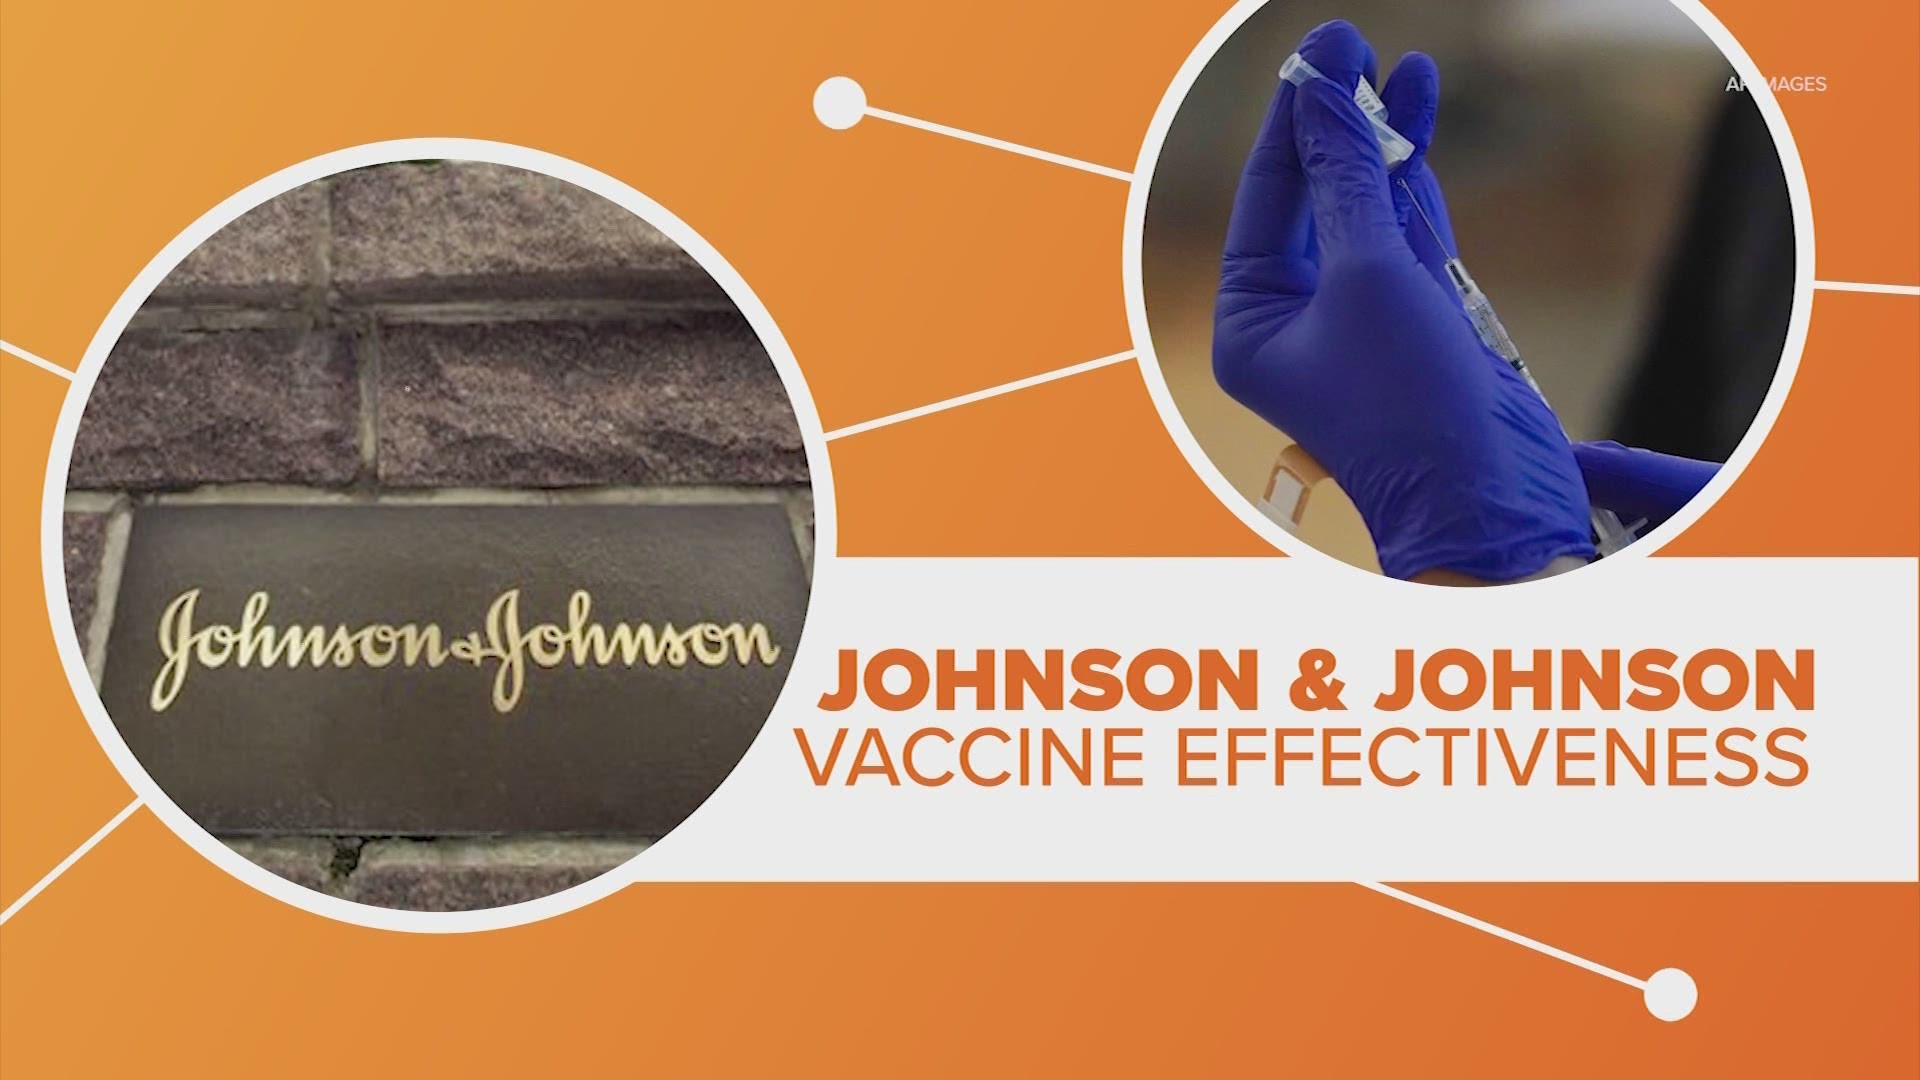 A study found that Johnson and Johnson, while effective against the original COVID-19, does not perform as well against its more contagious mutations.